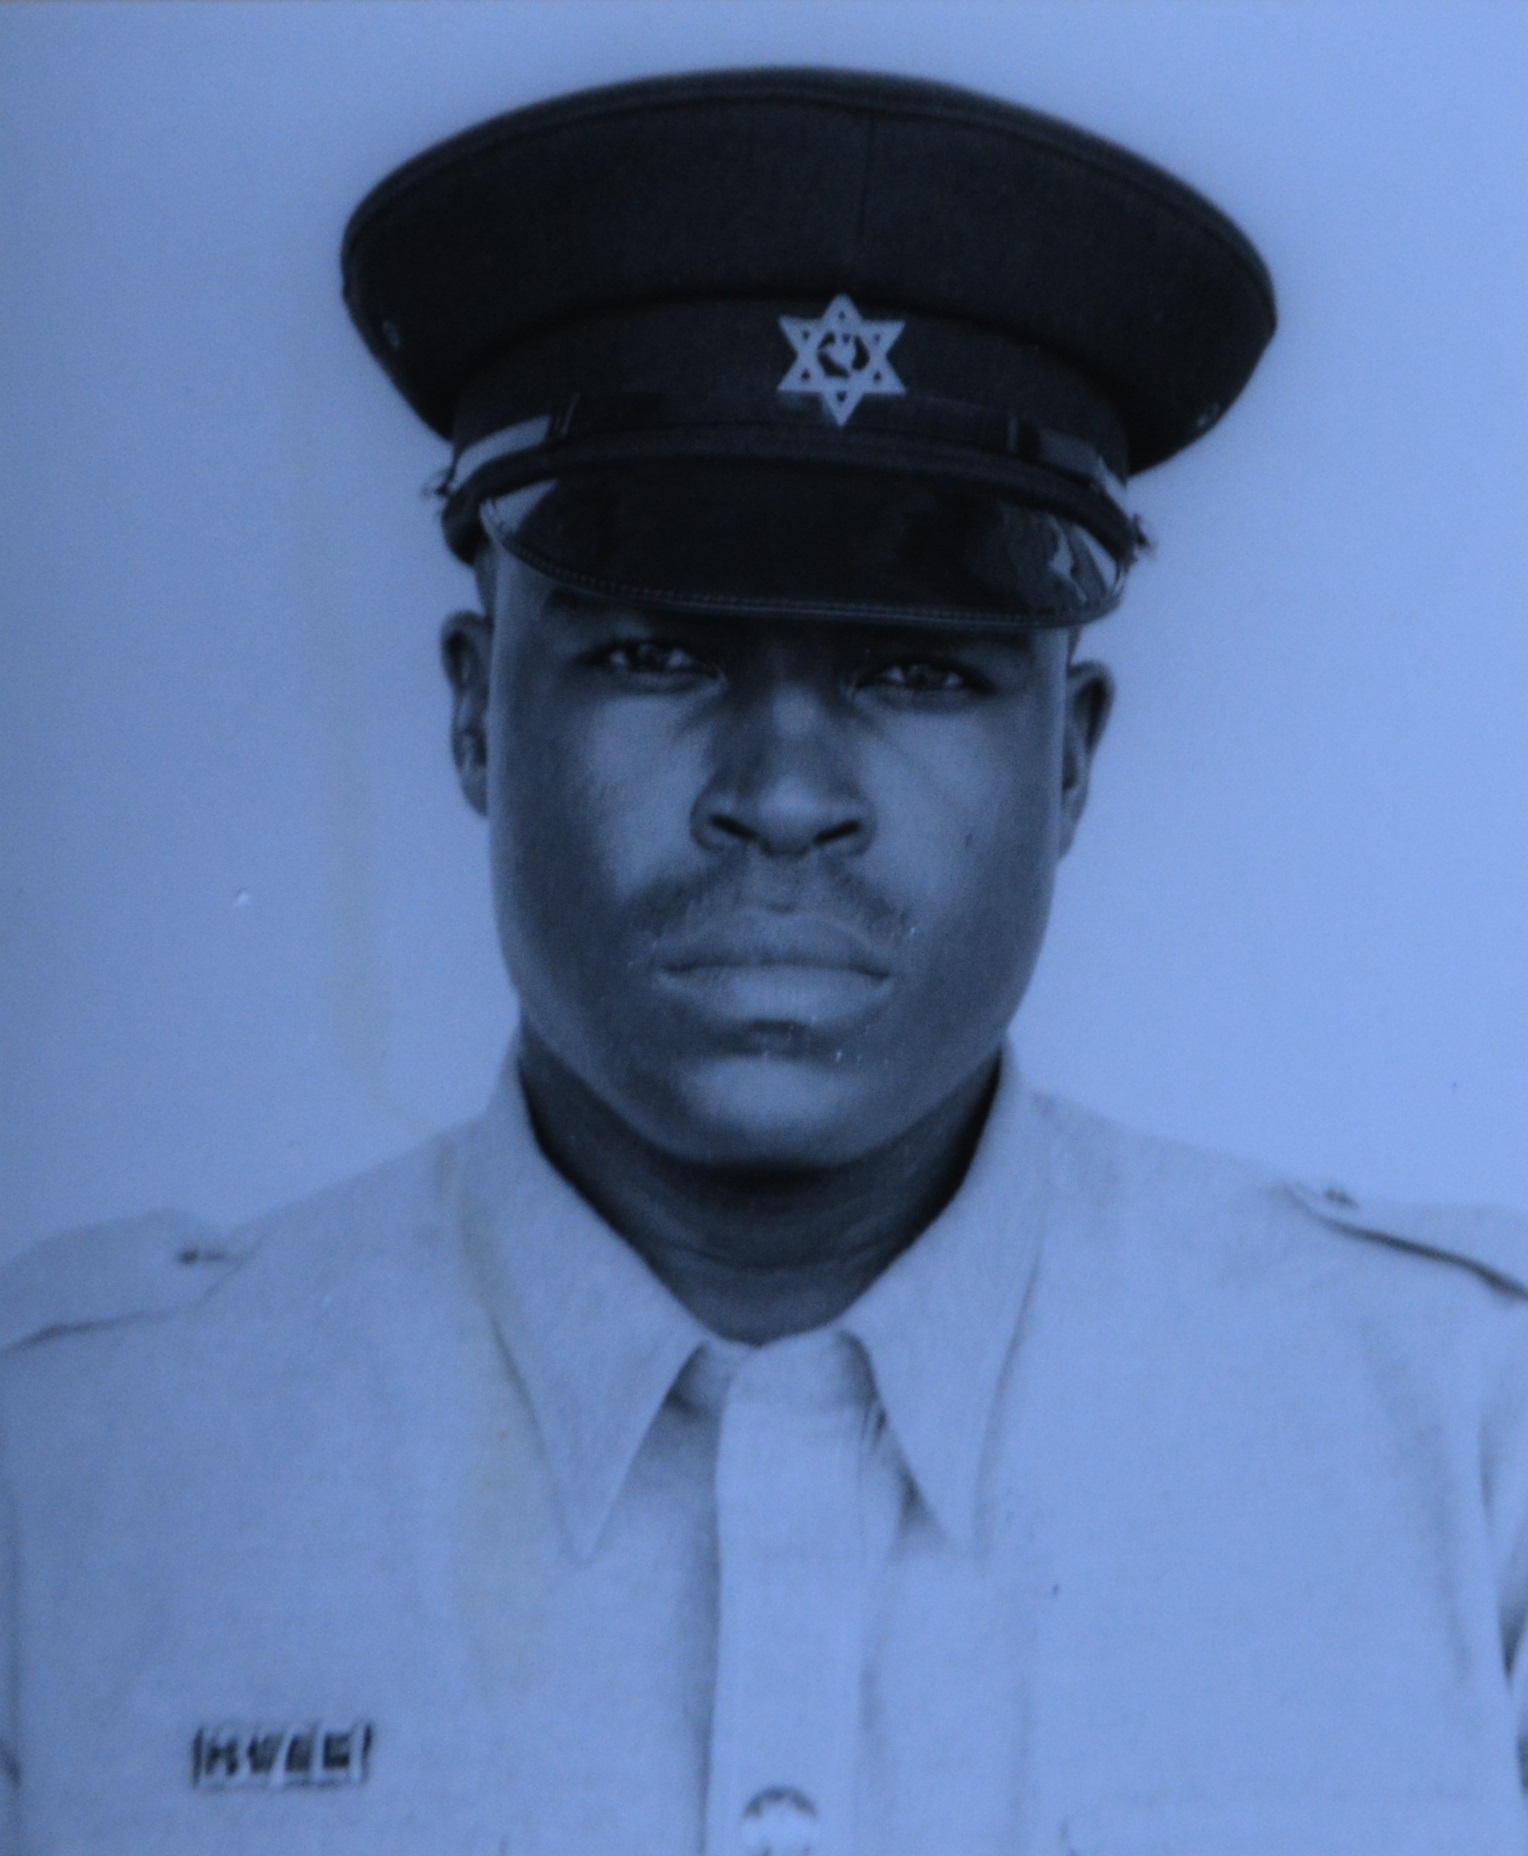 TTPS extends condolences on the passing of Police Corporal Frank Isaac